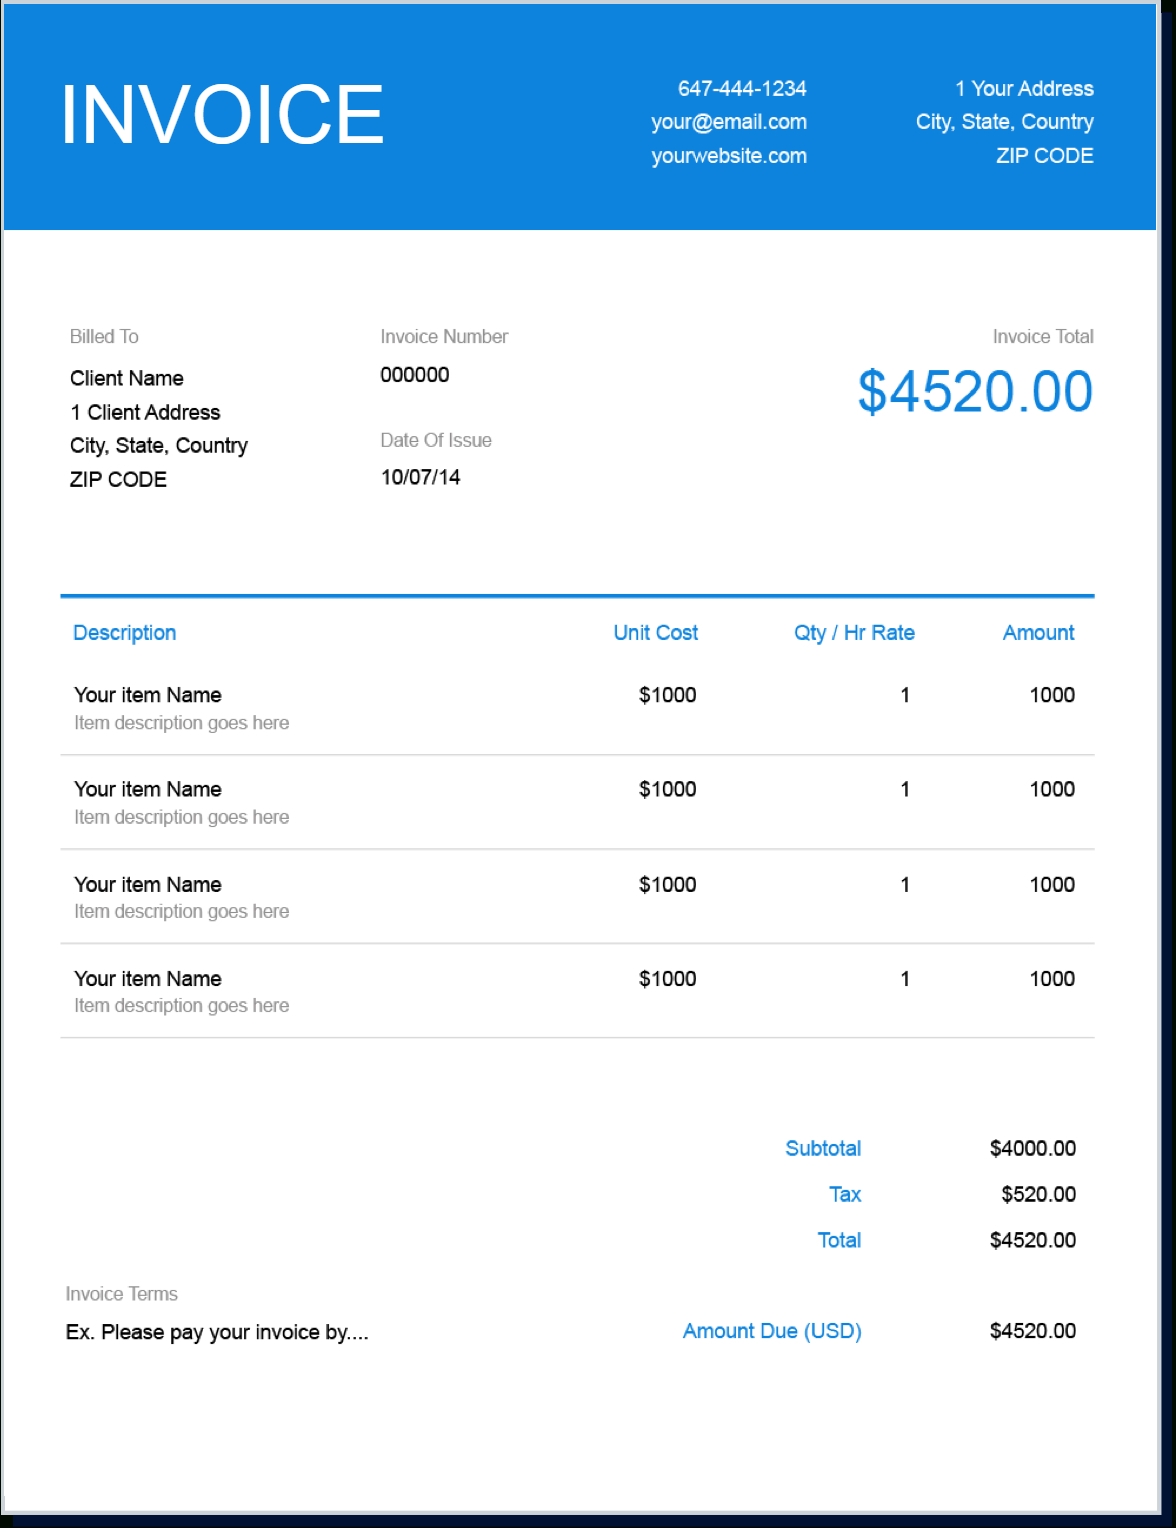 Invoice Template  Send In Minutes  Create Free Invoices Instantly with Make Your Own Invoice Template Free